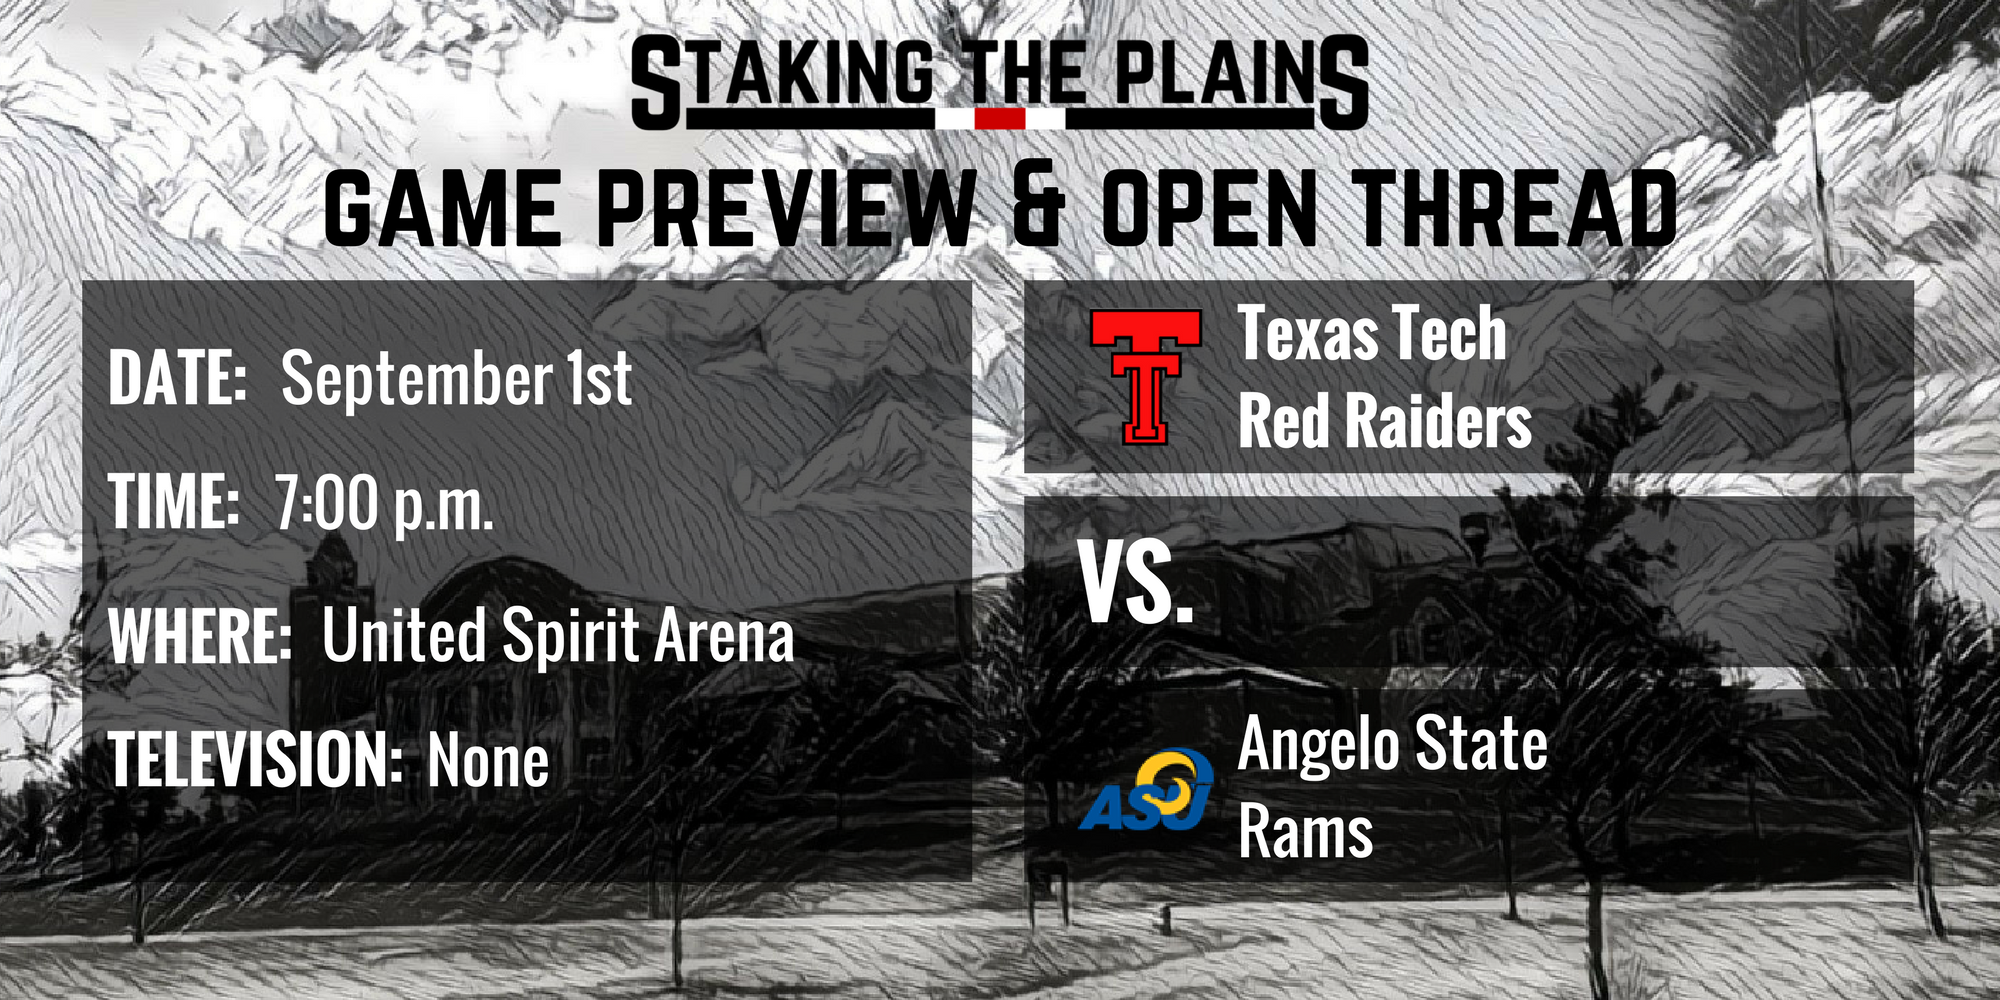 Game Preview & Open Thread: Angelo State vs. Texas Tech